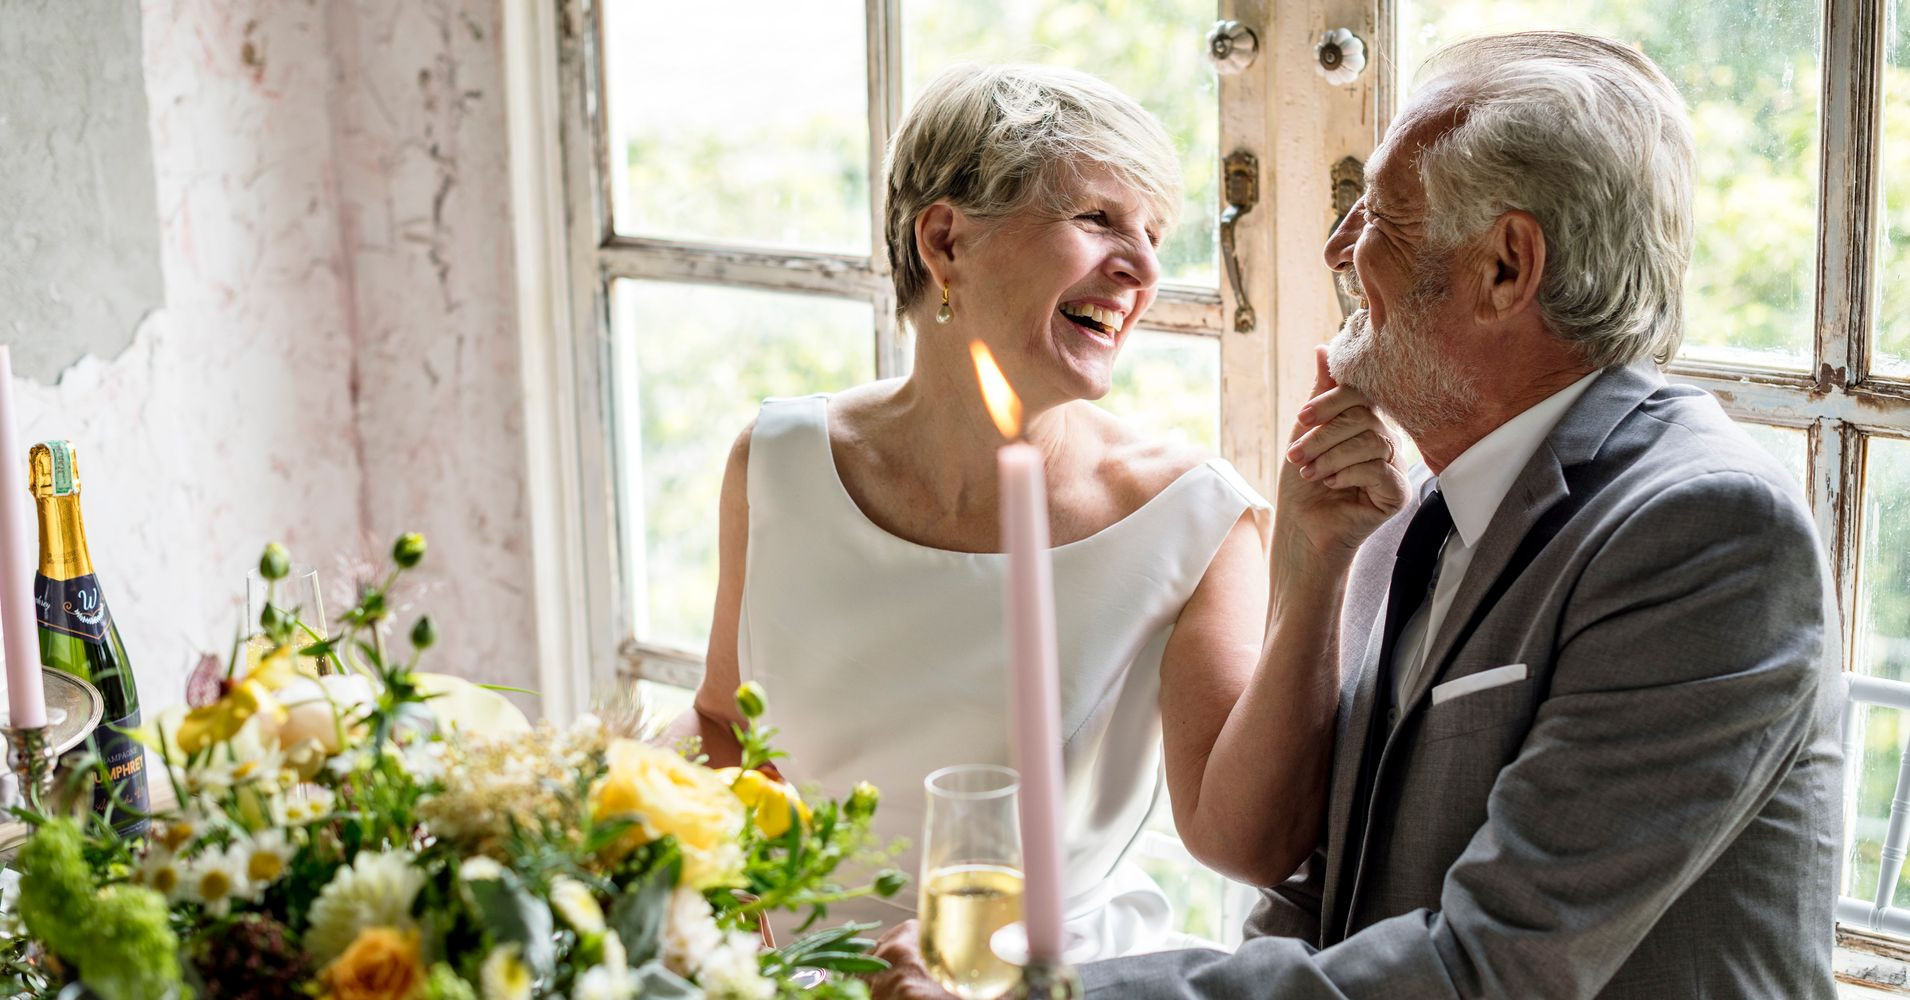 Christmas Gift Ideas For Older Couples
 27 Wedding Gifts For Older Couples Marrying The Second